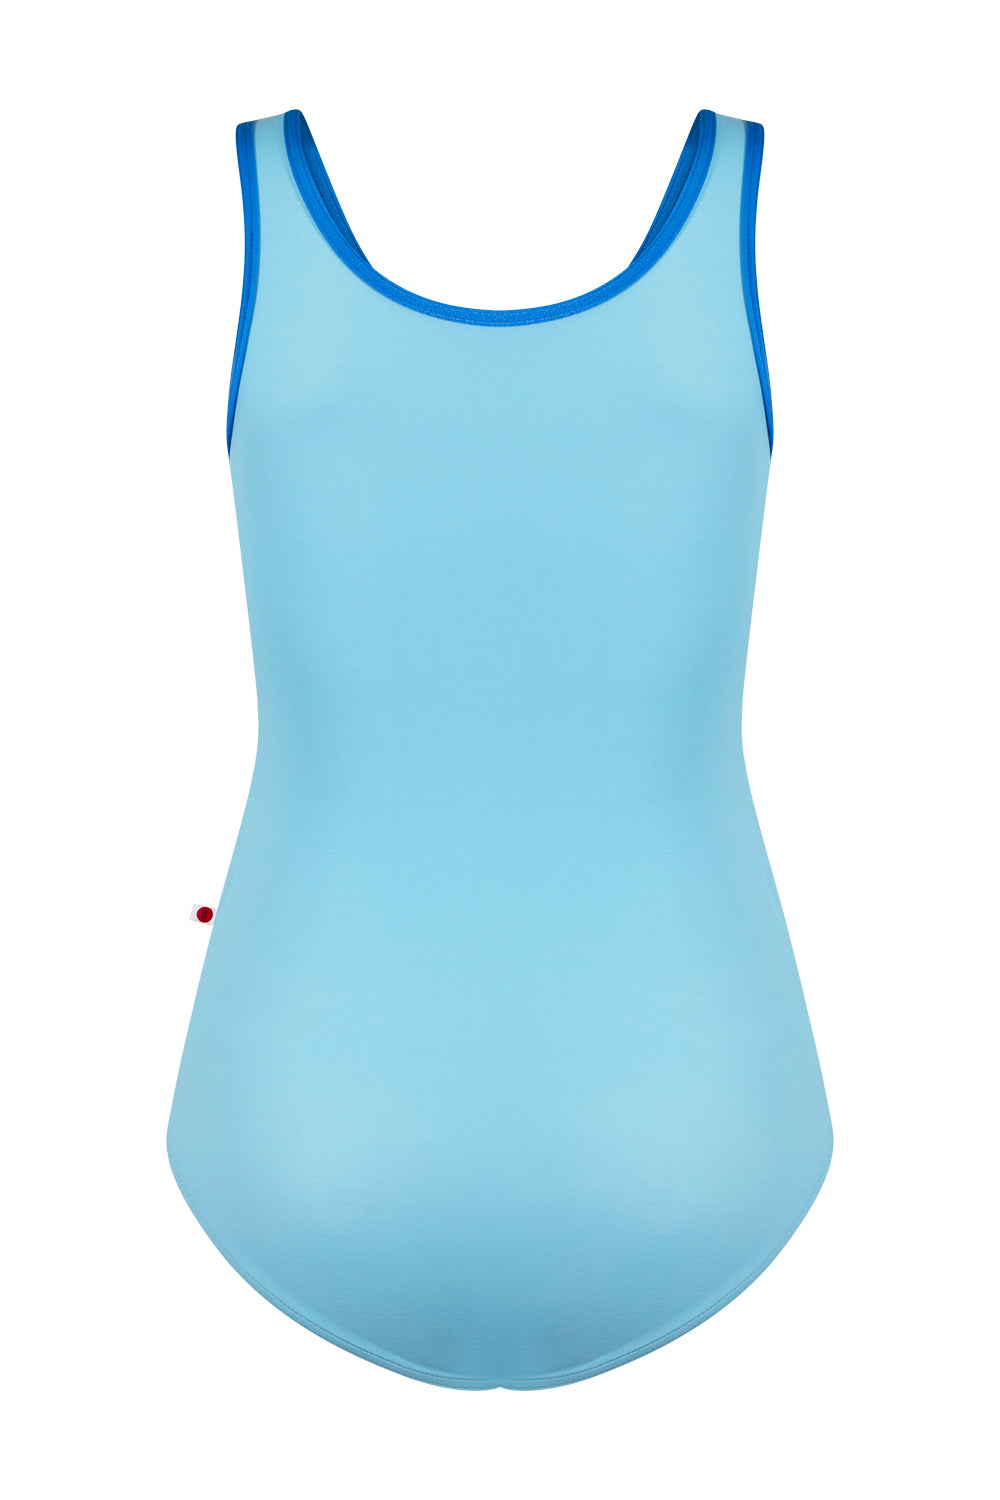 Cora leotard in T-Pool body color with N-Sky trim color and T-Frozen side stripe color